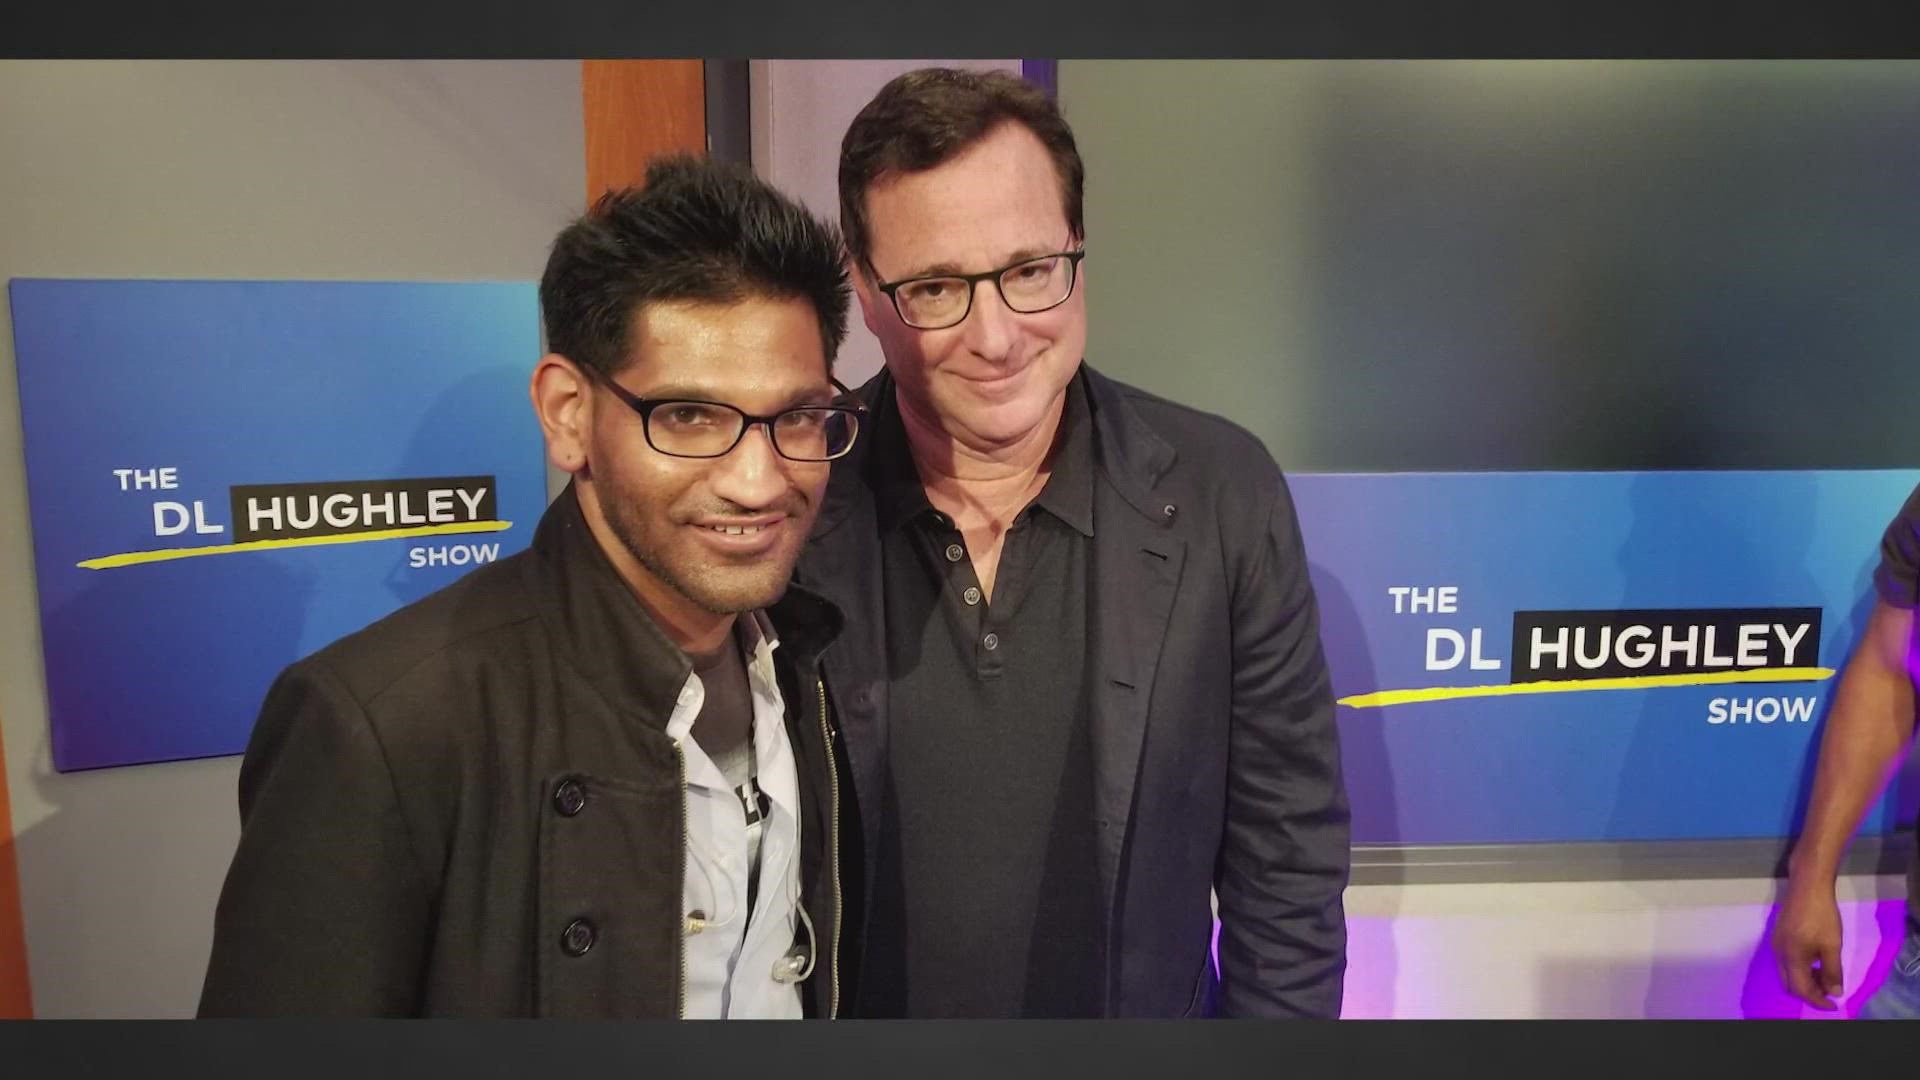 Over a decade ago, Jay Mandyam moved to Los Angeles to pursue a career in comedy. He met Bob Saget along the way, who helped critique his act for years.